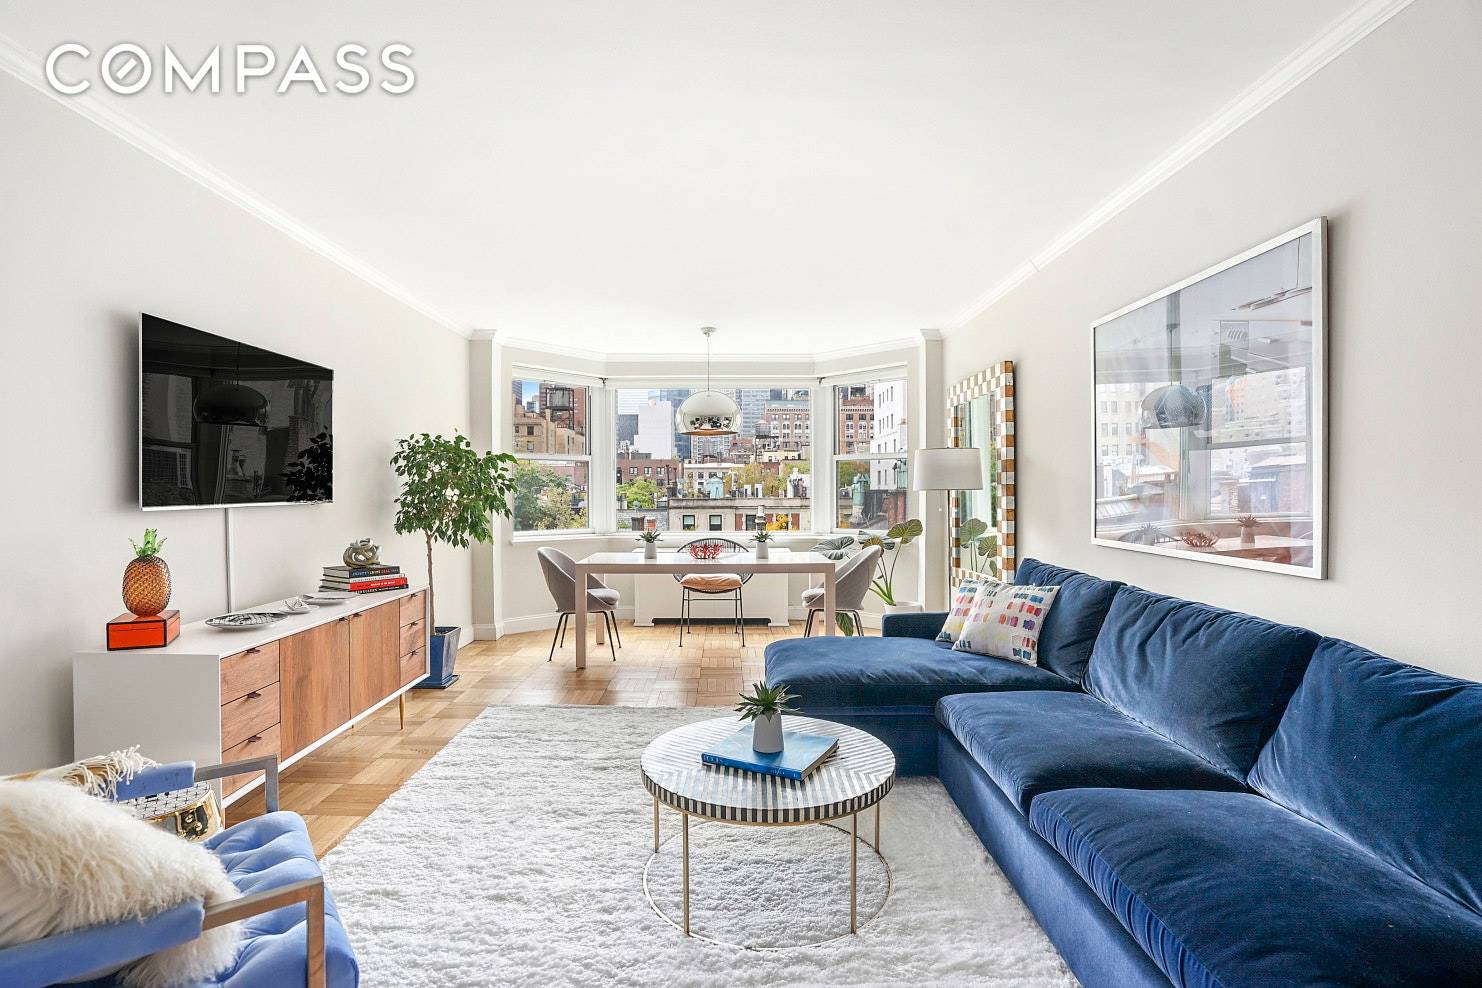 SHOWINGS CAN RESUME FOR PHASE 2 Film caliber views, and utilities covered in the maintenance are just two reasons to love this recently renovated and spacious 1 bedroom, 1 bath ...